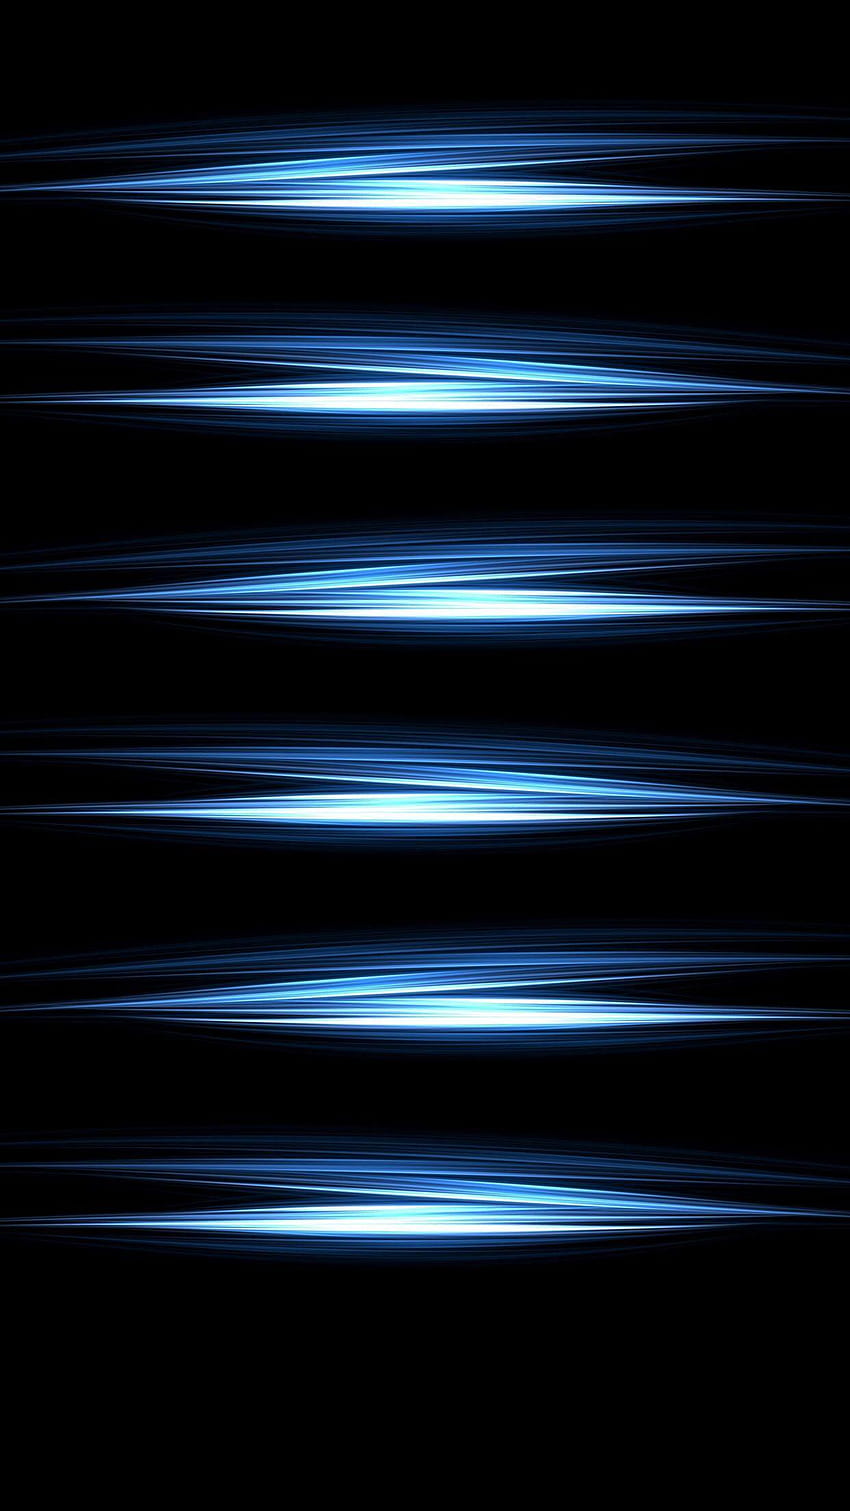 ↑↑TAP AND GET THE APP! Shelves Stylish Black Lights, iphone app HD phone wallpaper